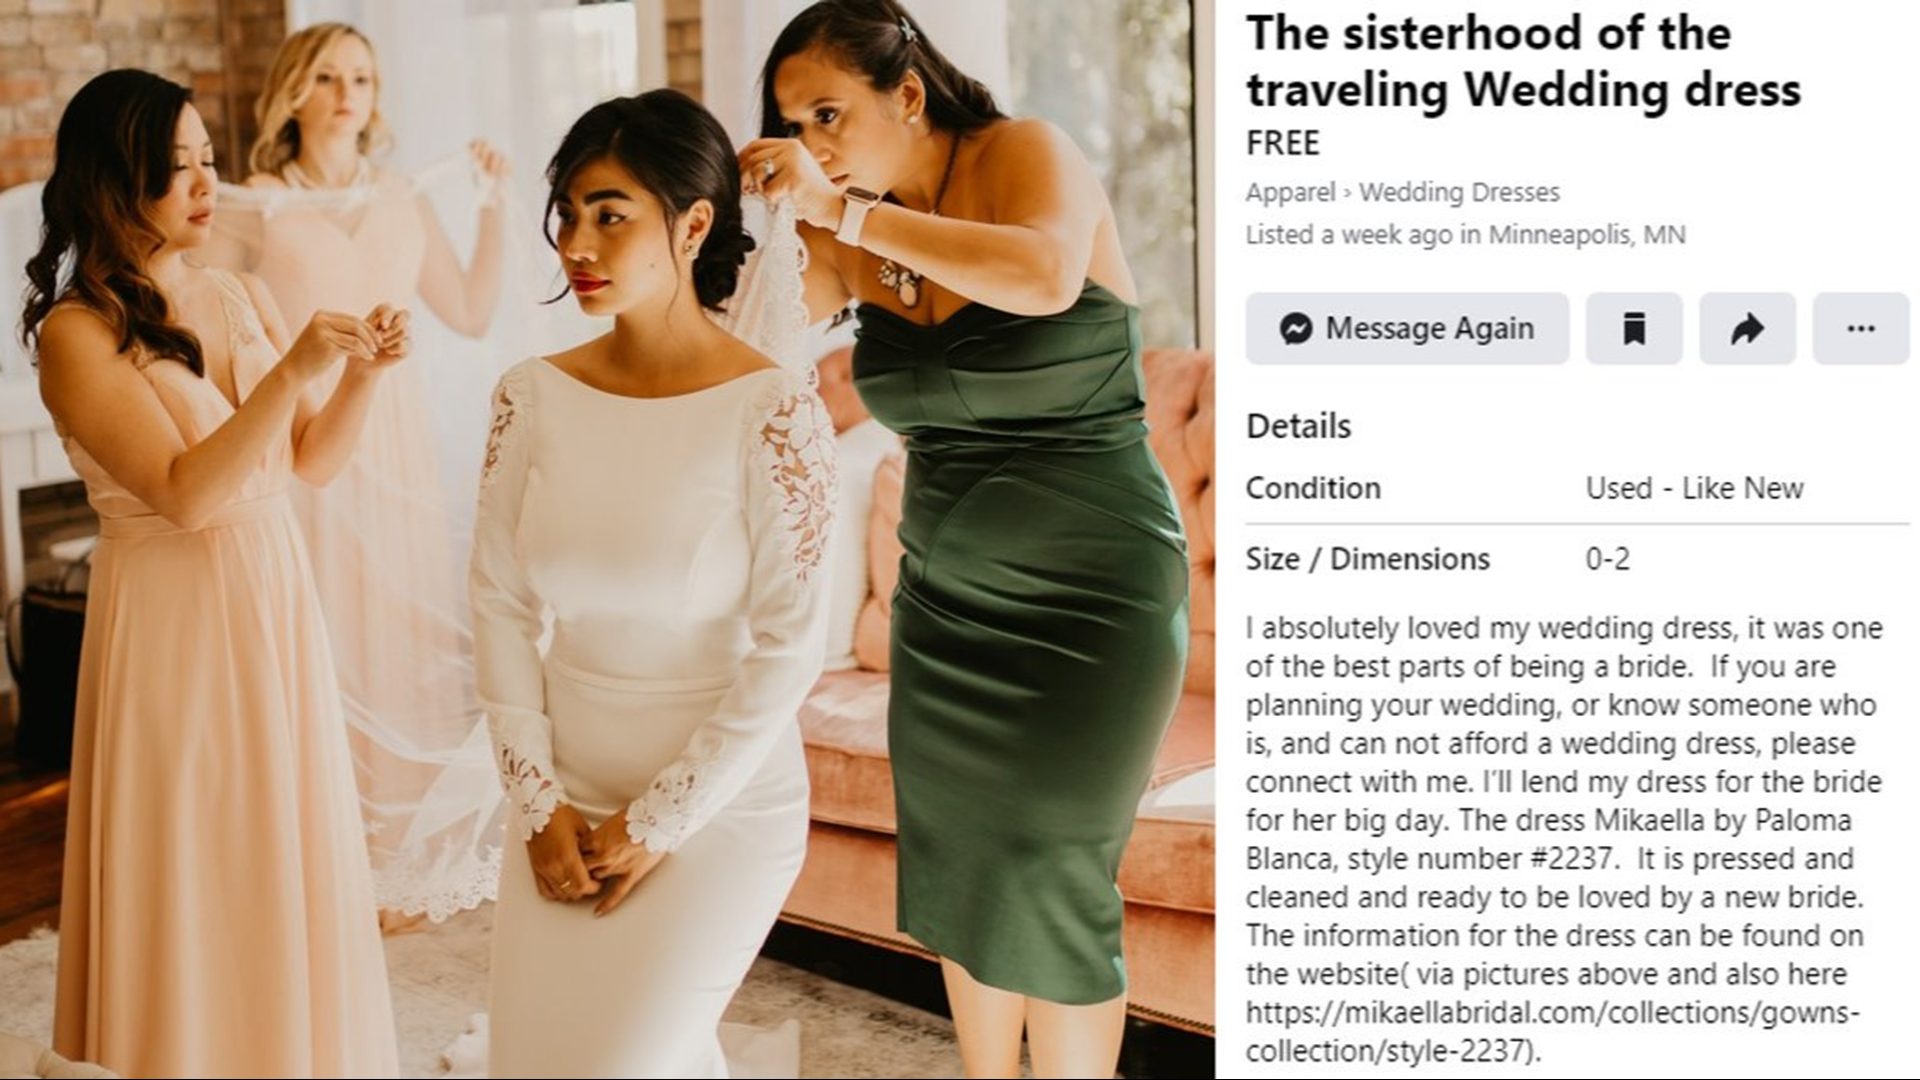 Tina Nguyen had the perfect wedding last year. As she watched other brides navigate COVID-19, she wanted to help. Then she thought of the dress in her closet.